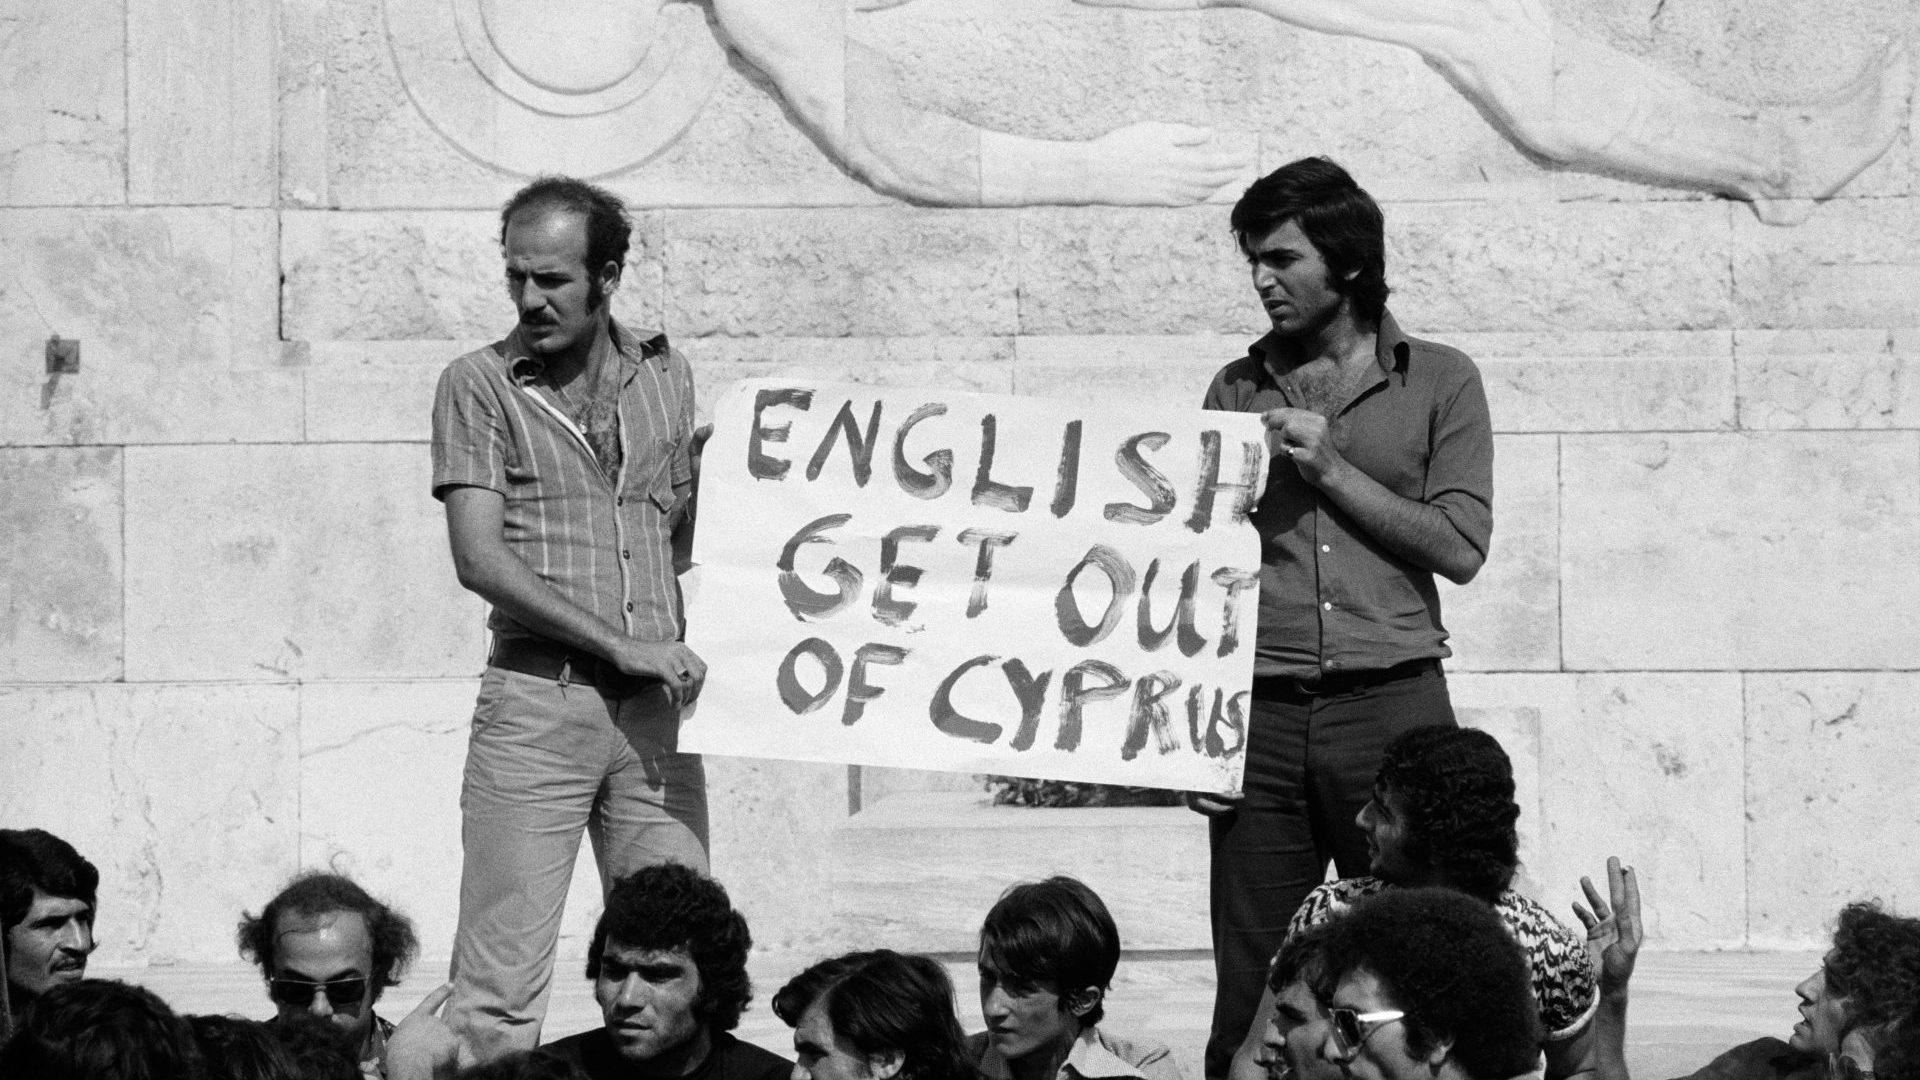 Young Cypriots demonstrating in front of the parliament in Athens to be able to return to Cyprus to fight the Turks in 1974. Photo: Gilbert UZAN/Gamma-Rapho via Getty Images